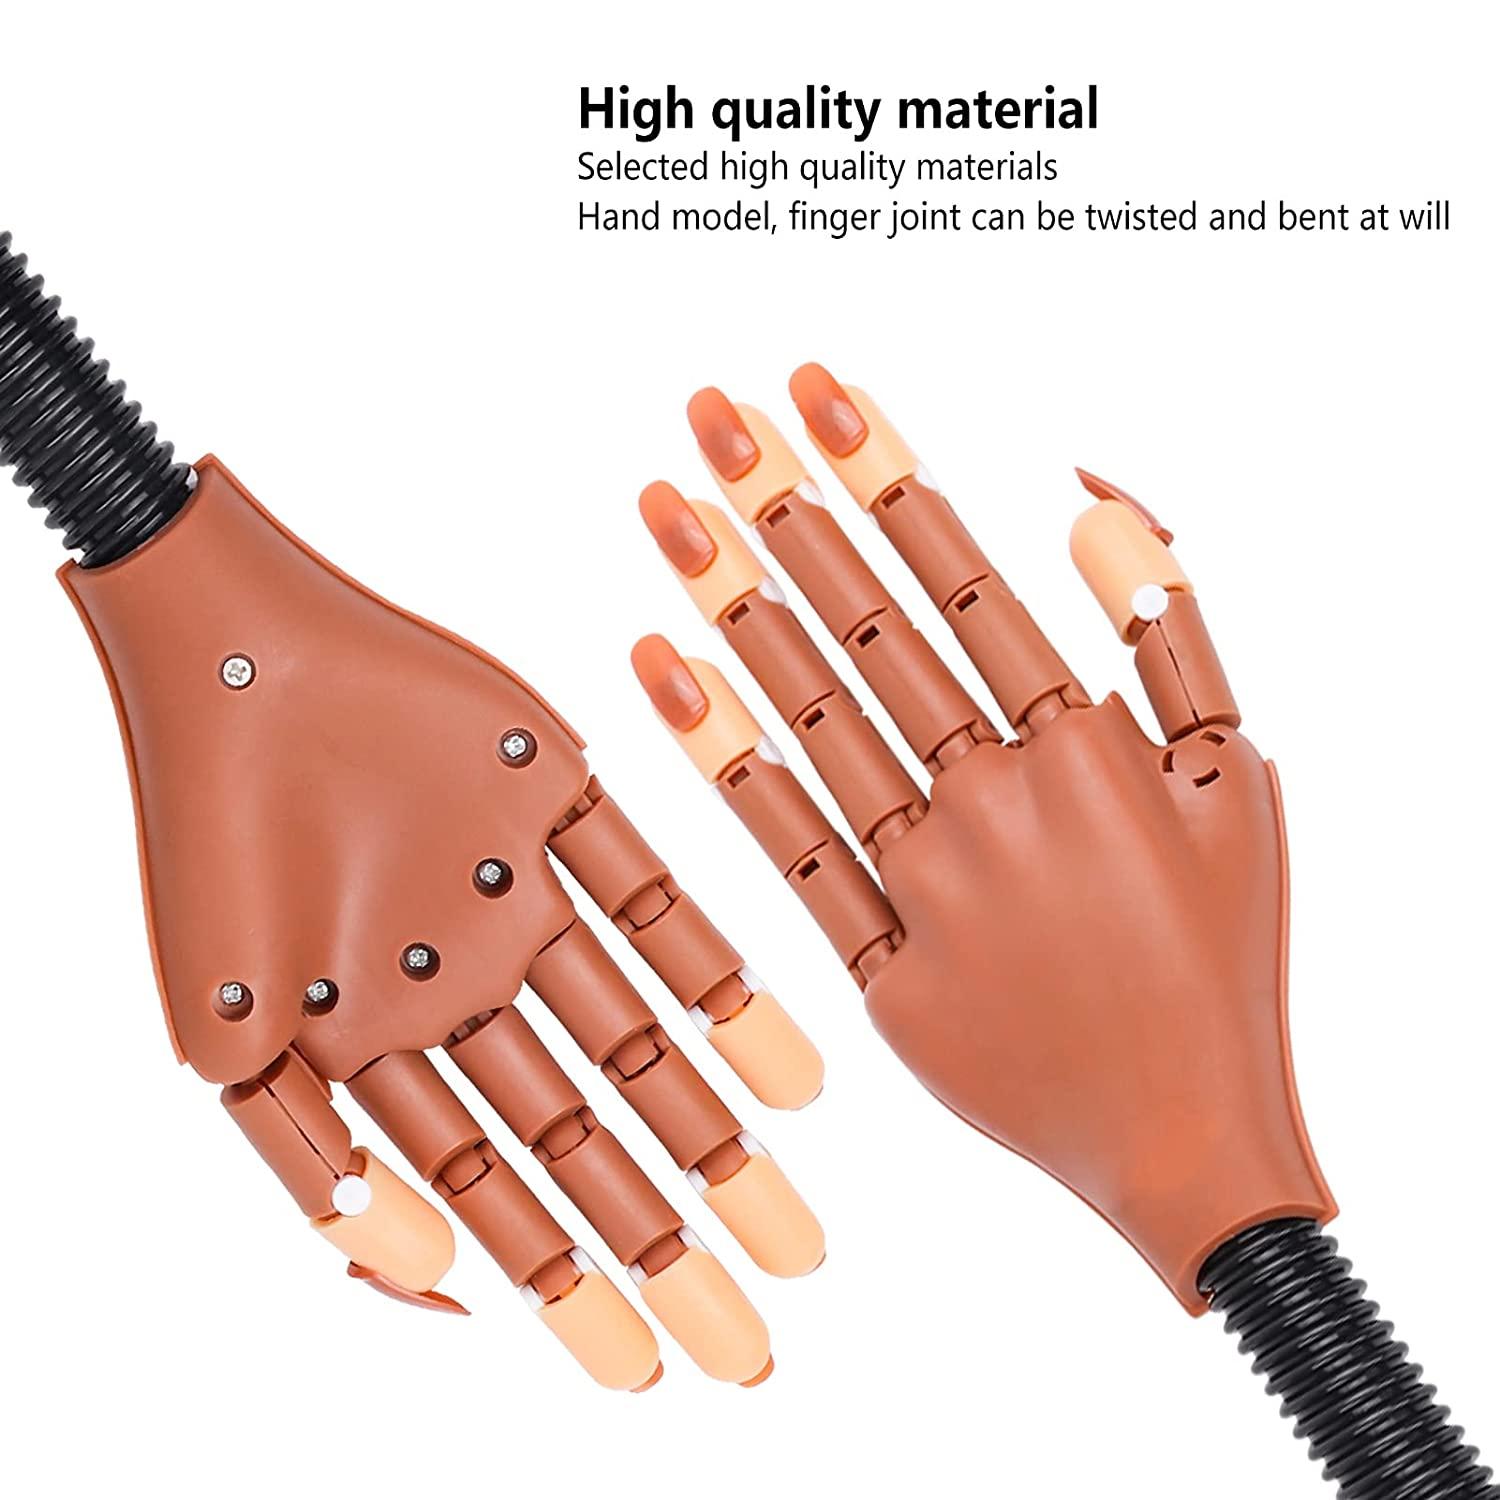 1pc Nail Practice Hand For Acrylic Nails, Mannequin Hand For Nails Practice,  Flexible Bendable Fake Hand Manicure Nail Practice Hand